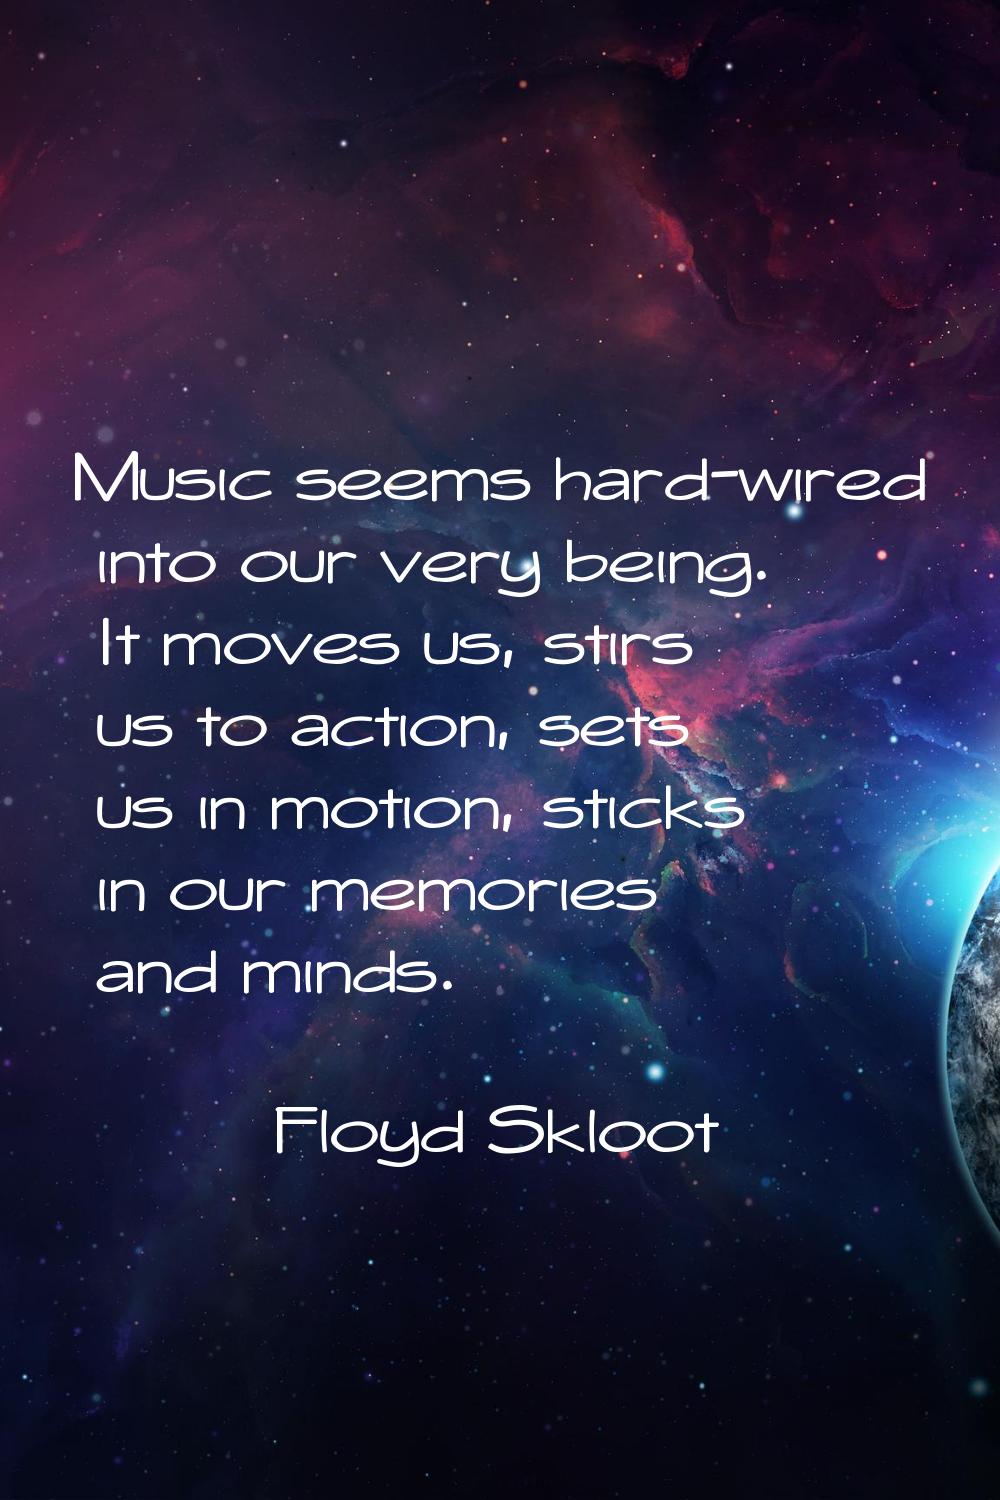 Music seems hard-wired into our very being. It moves us, stirs us to action, sets us in motion, sti